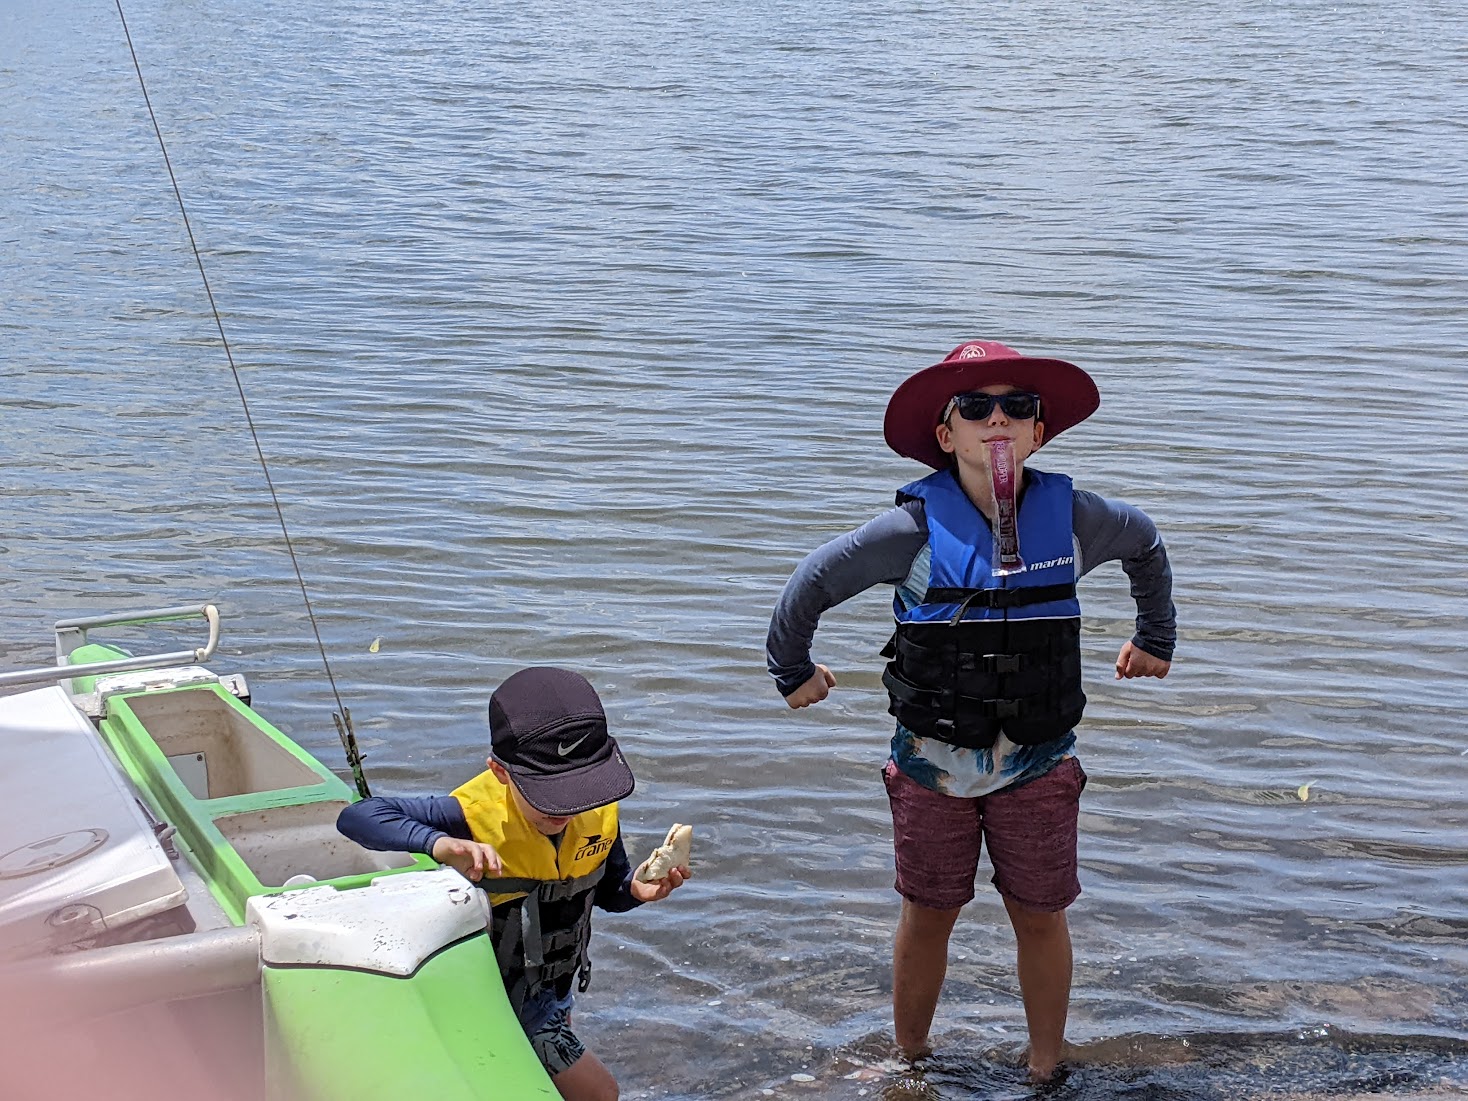 A photo of two boys standing in water next to the boat. Alex is striking a strongman pose with a zooper dooper. Sam is holding a vegemite sandwich.